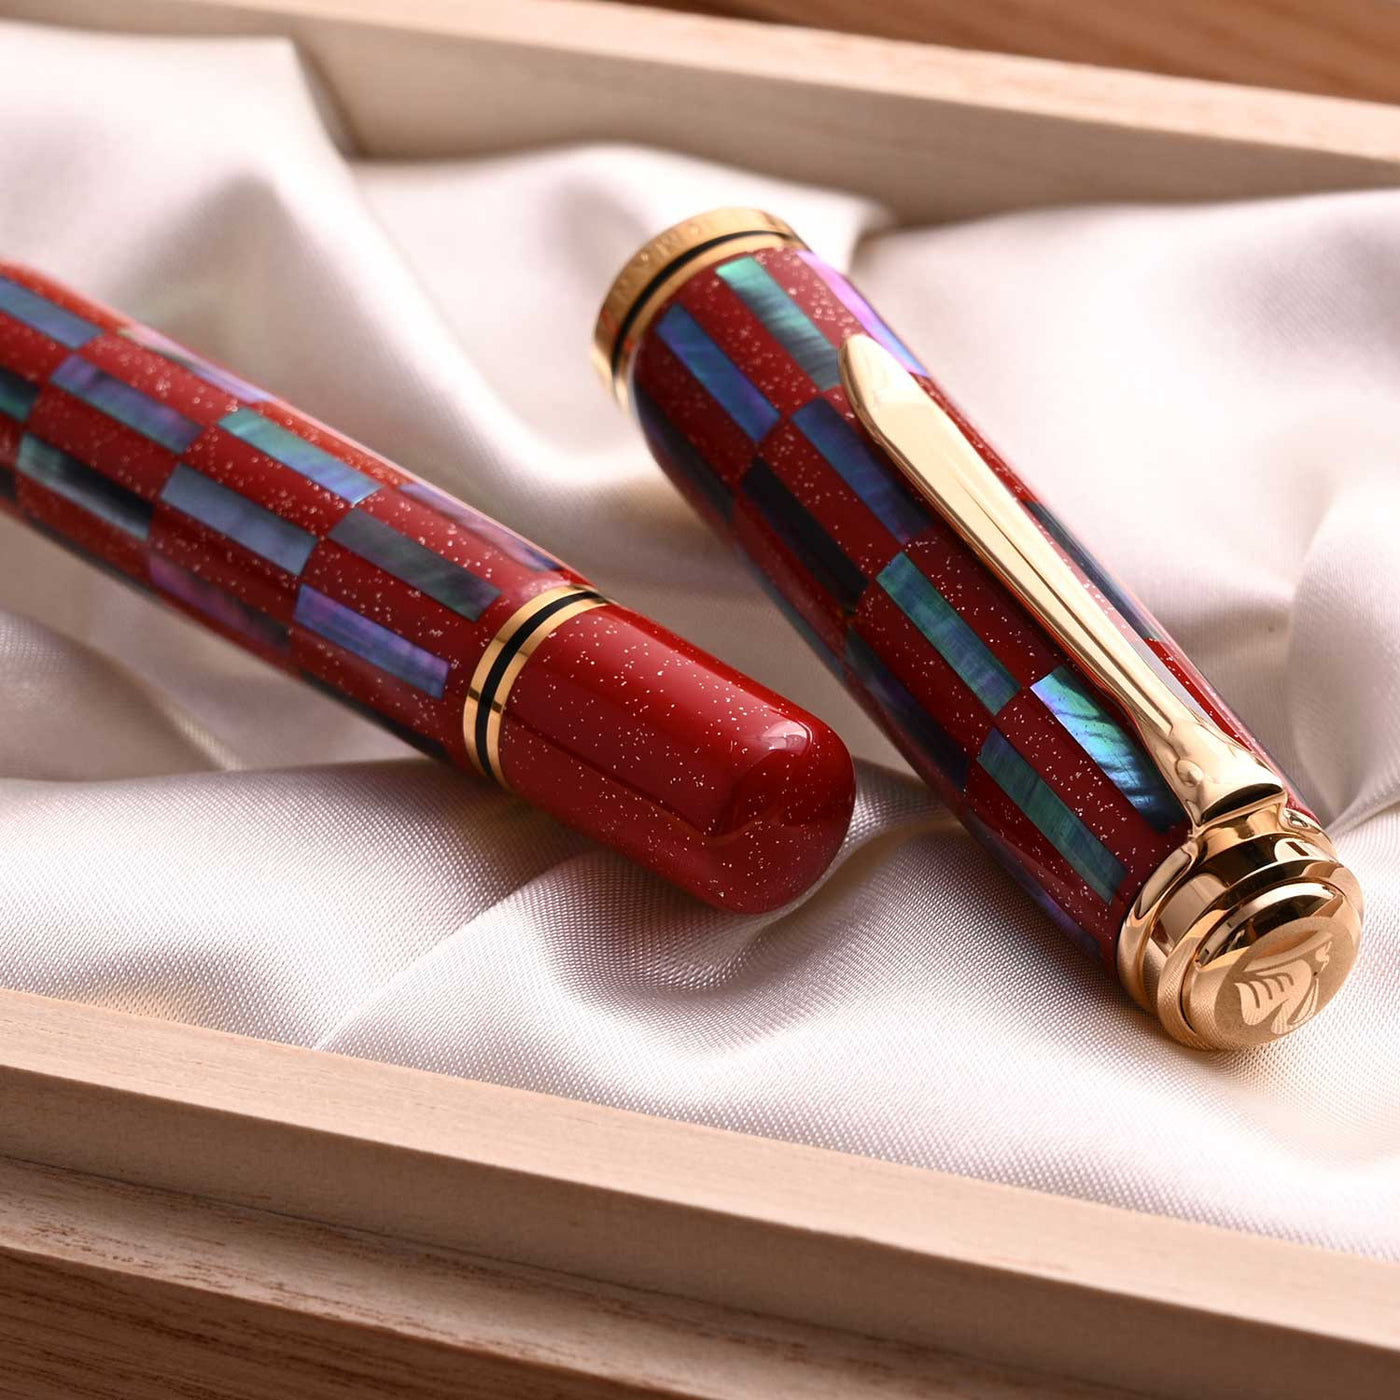 Pelikan M1000 Fountain Pen - Raden Red Infinity (Limited Edition) 12